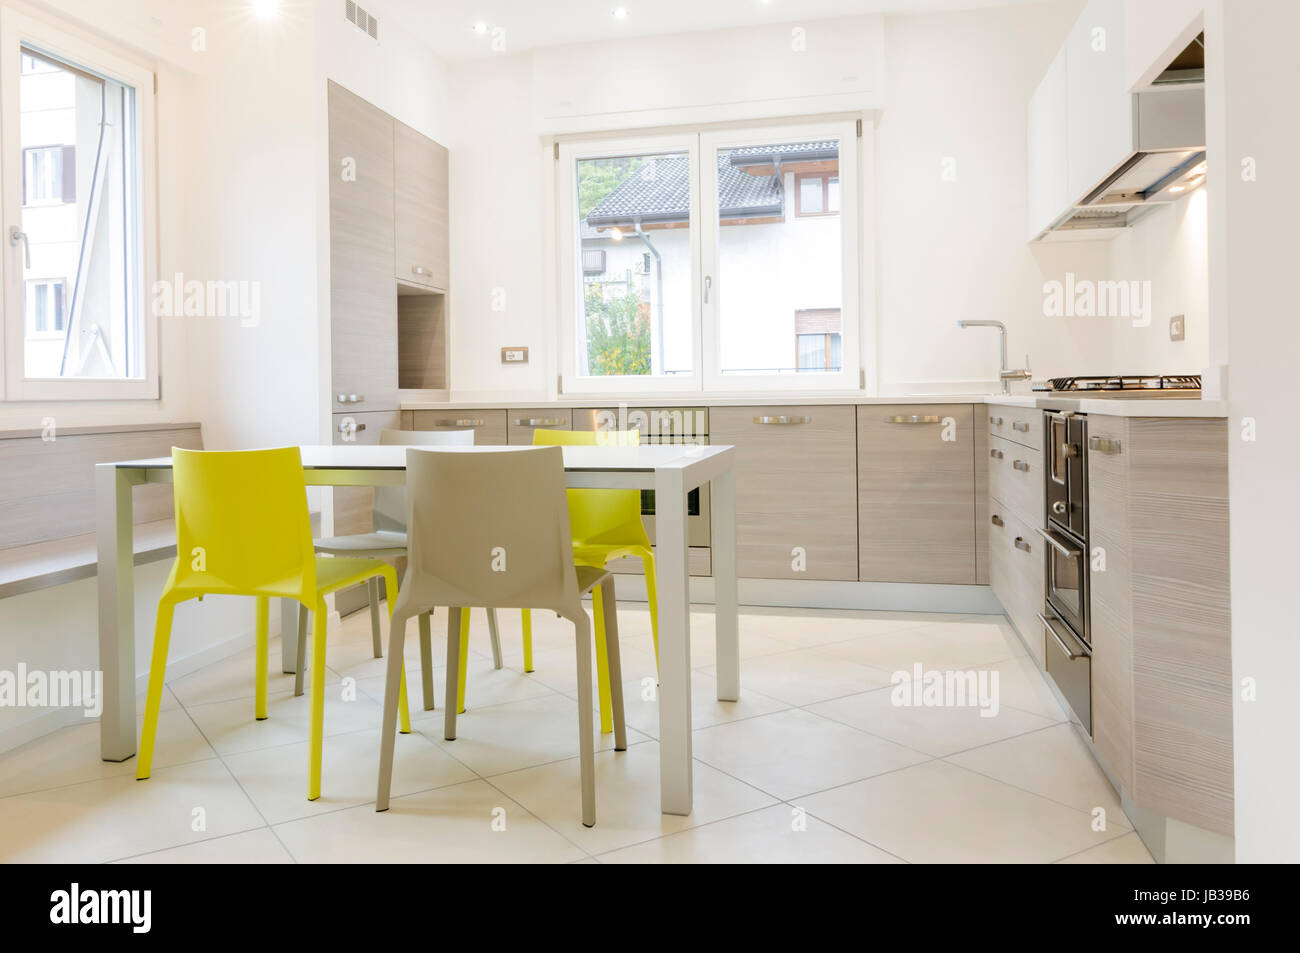 Modern kitchen interior with wooden cabinets, white table, grey and yellow chairs Stock Photo